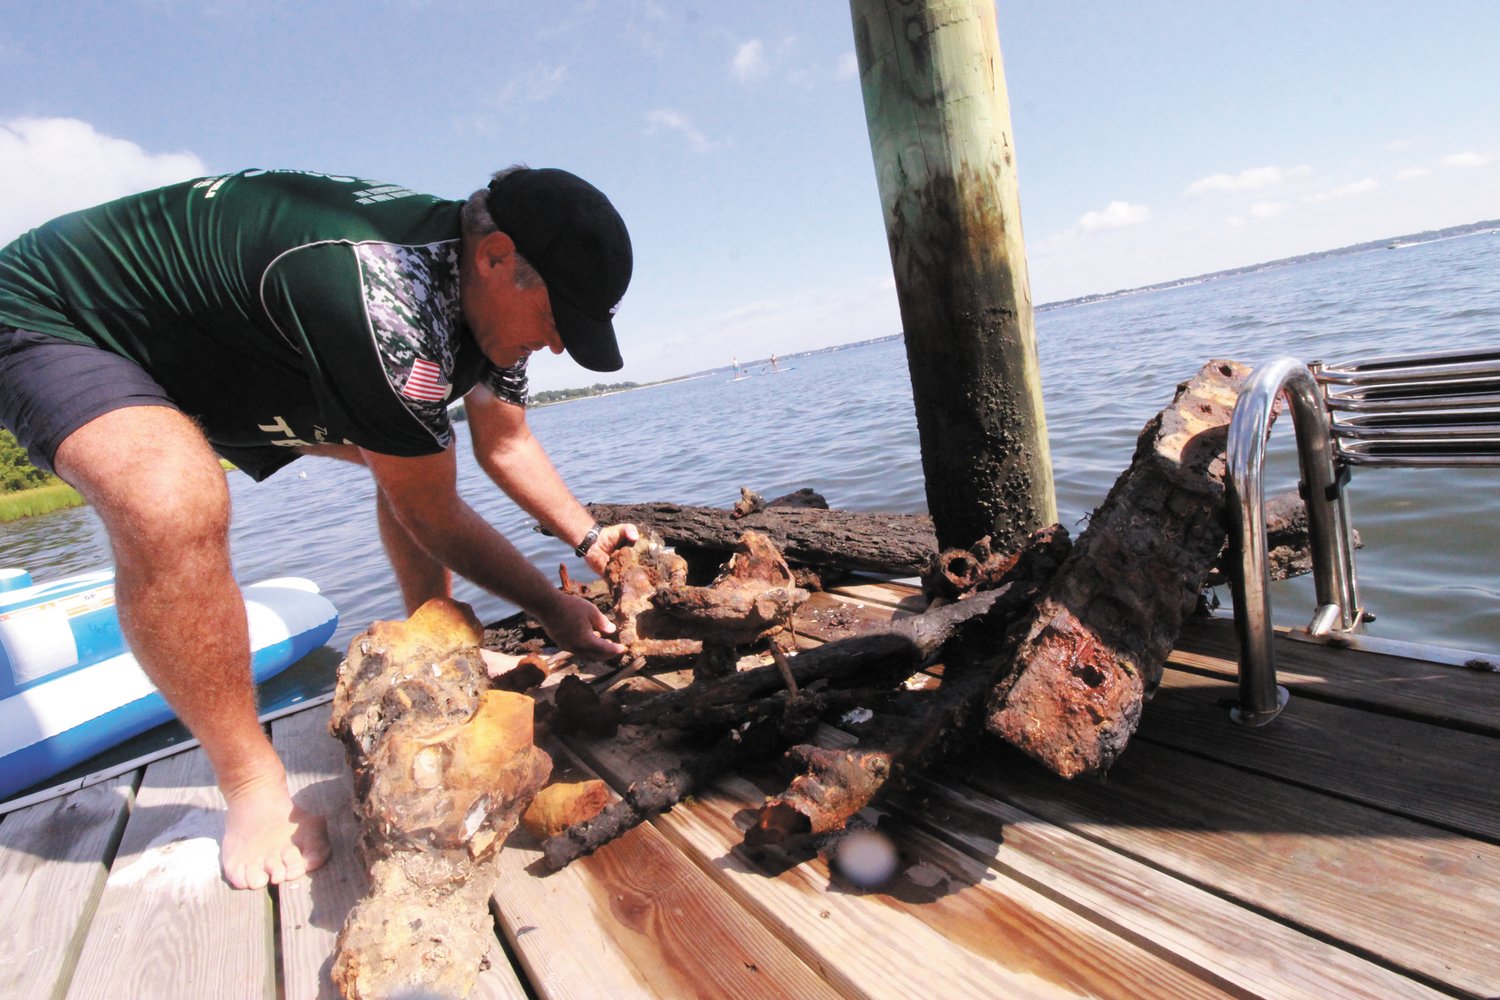 WHAT IS IT? Keith Strickland with some of the sunken debris recovered from the shallows in front of his home in Conimicut. He thinks the large chunk, which is metallic, could be the cleat off a ship. (Warwick Beacon photo)